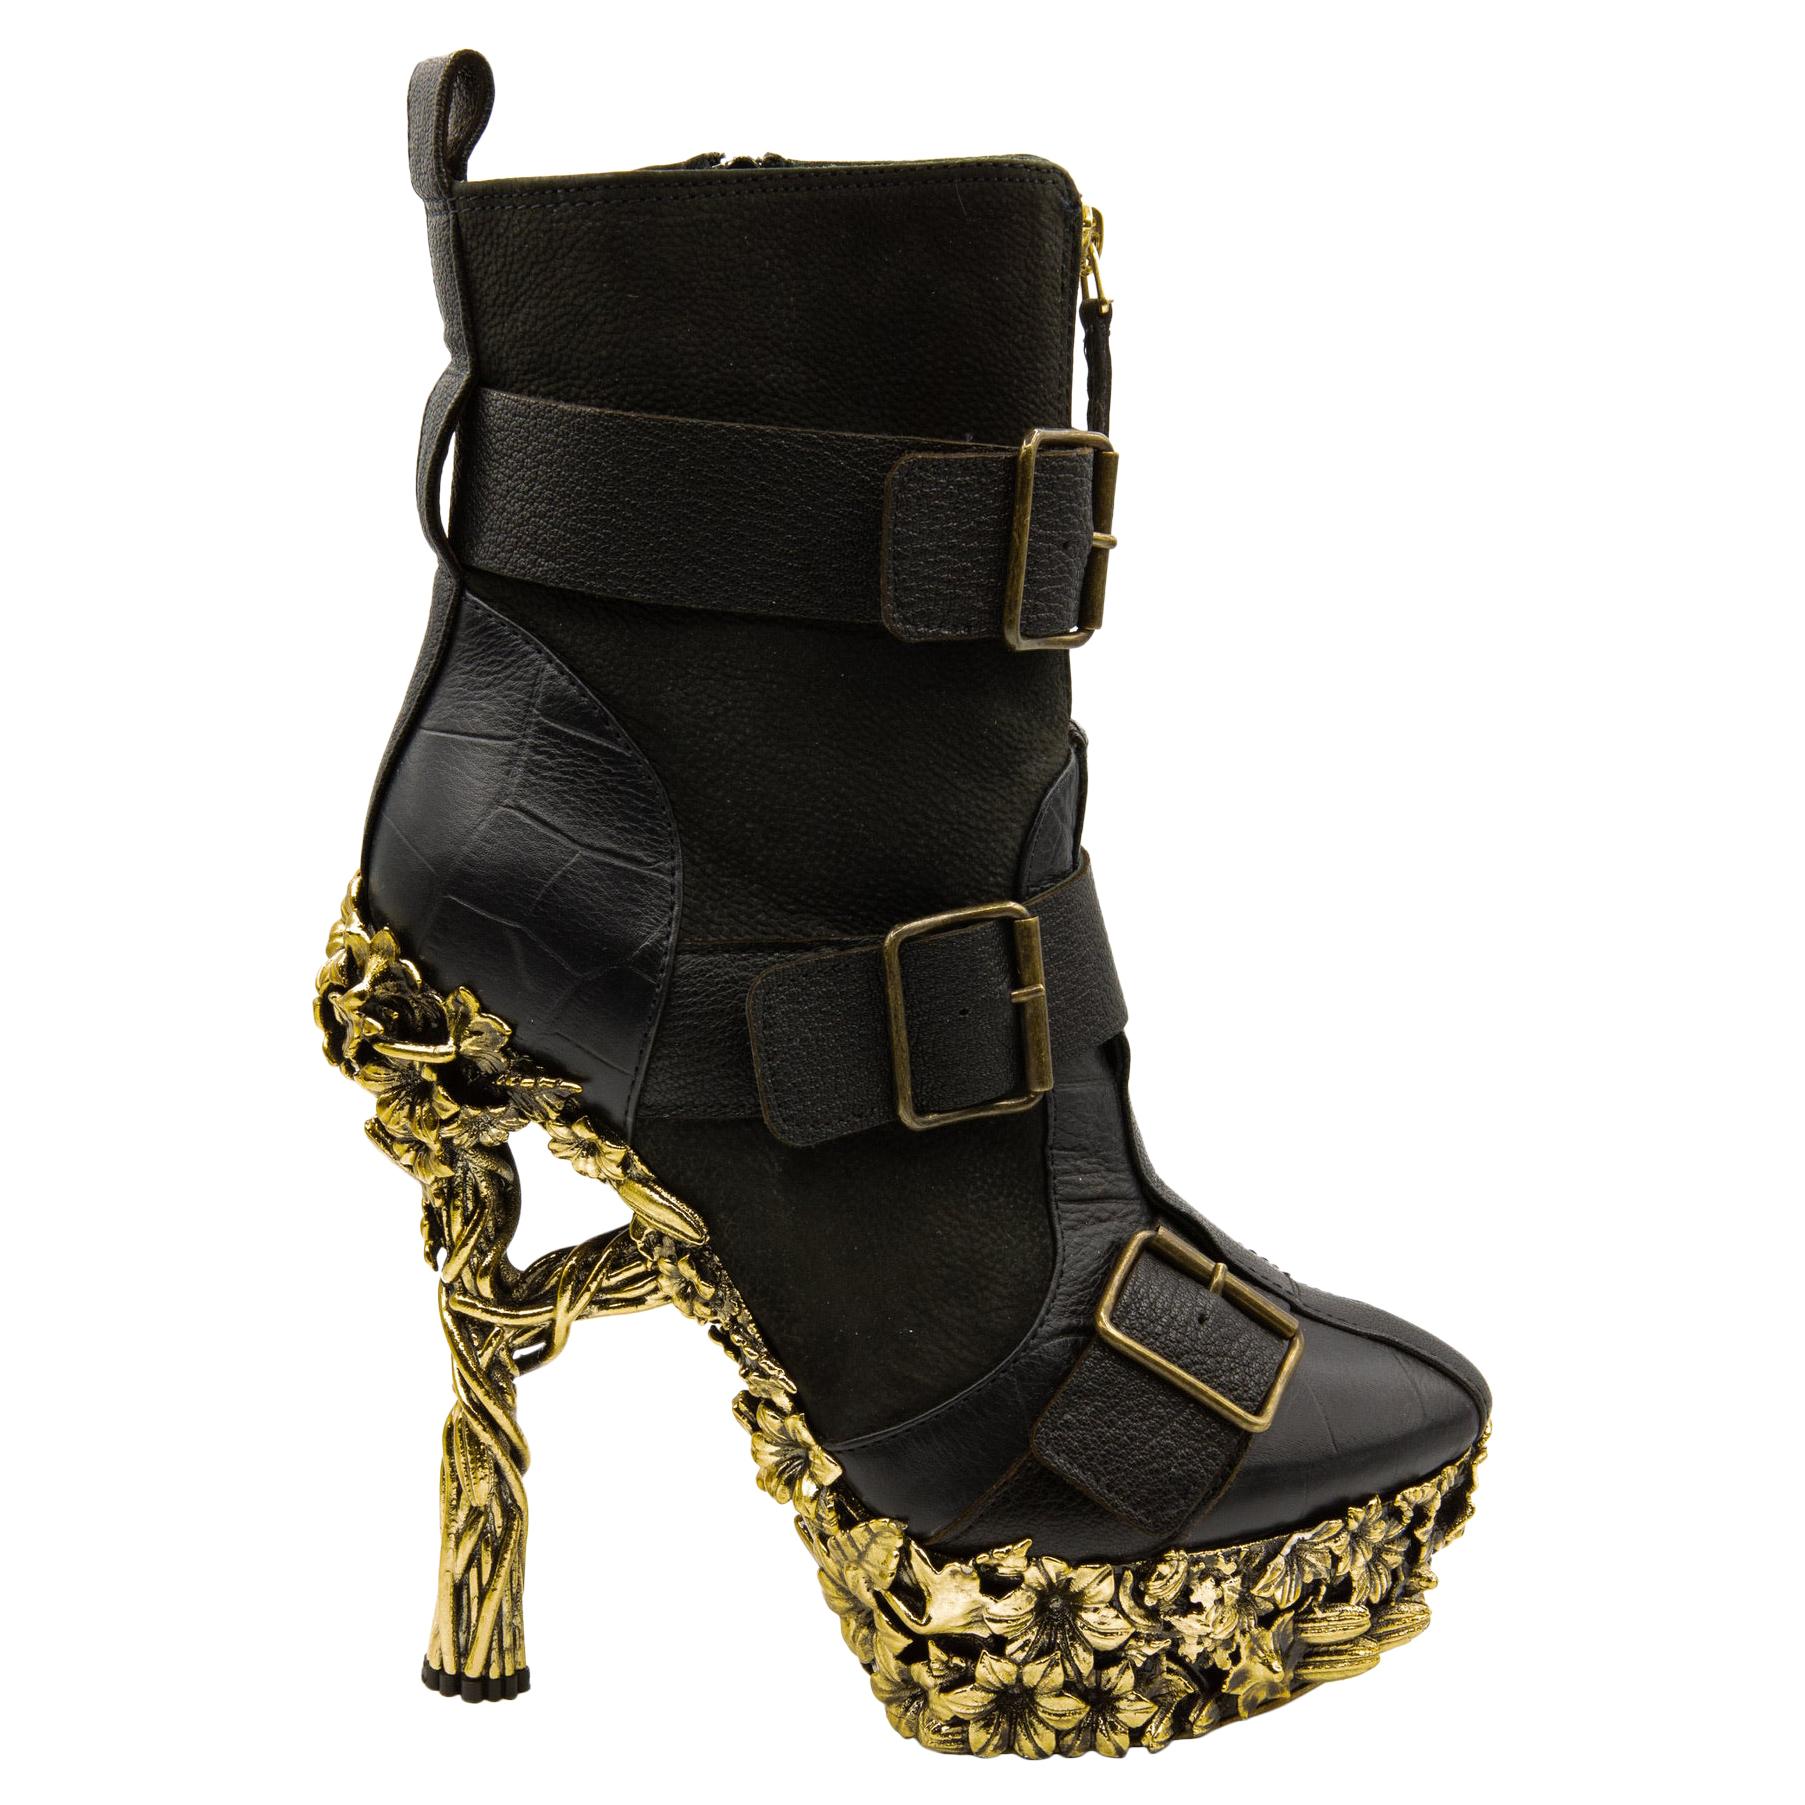 Alexander McQueen Fall 2010 Ready-To-Wear Black Leather Ankle Boots